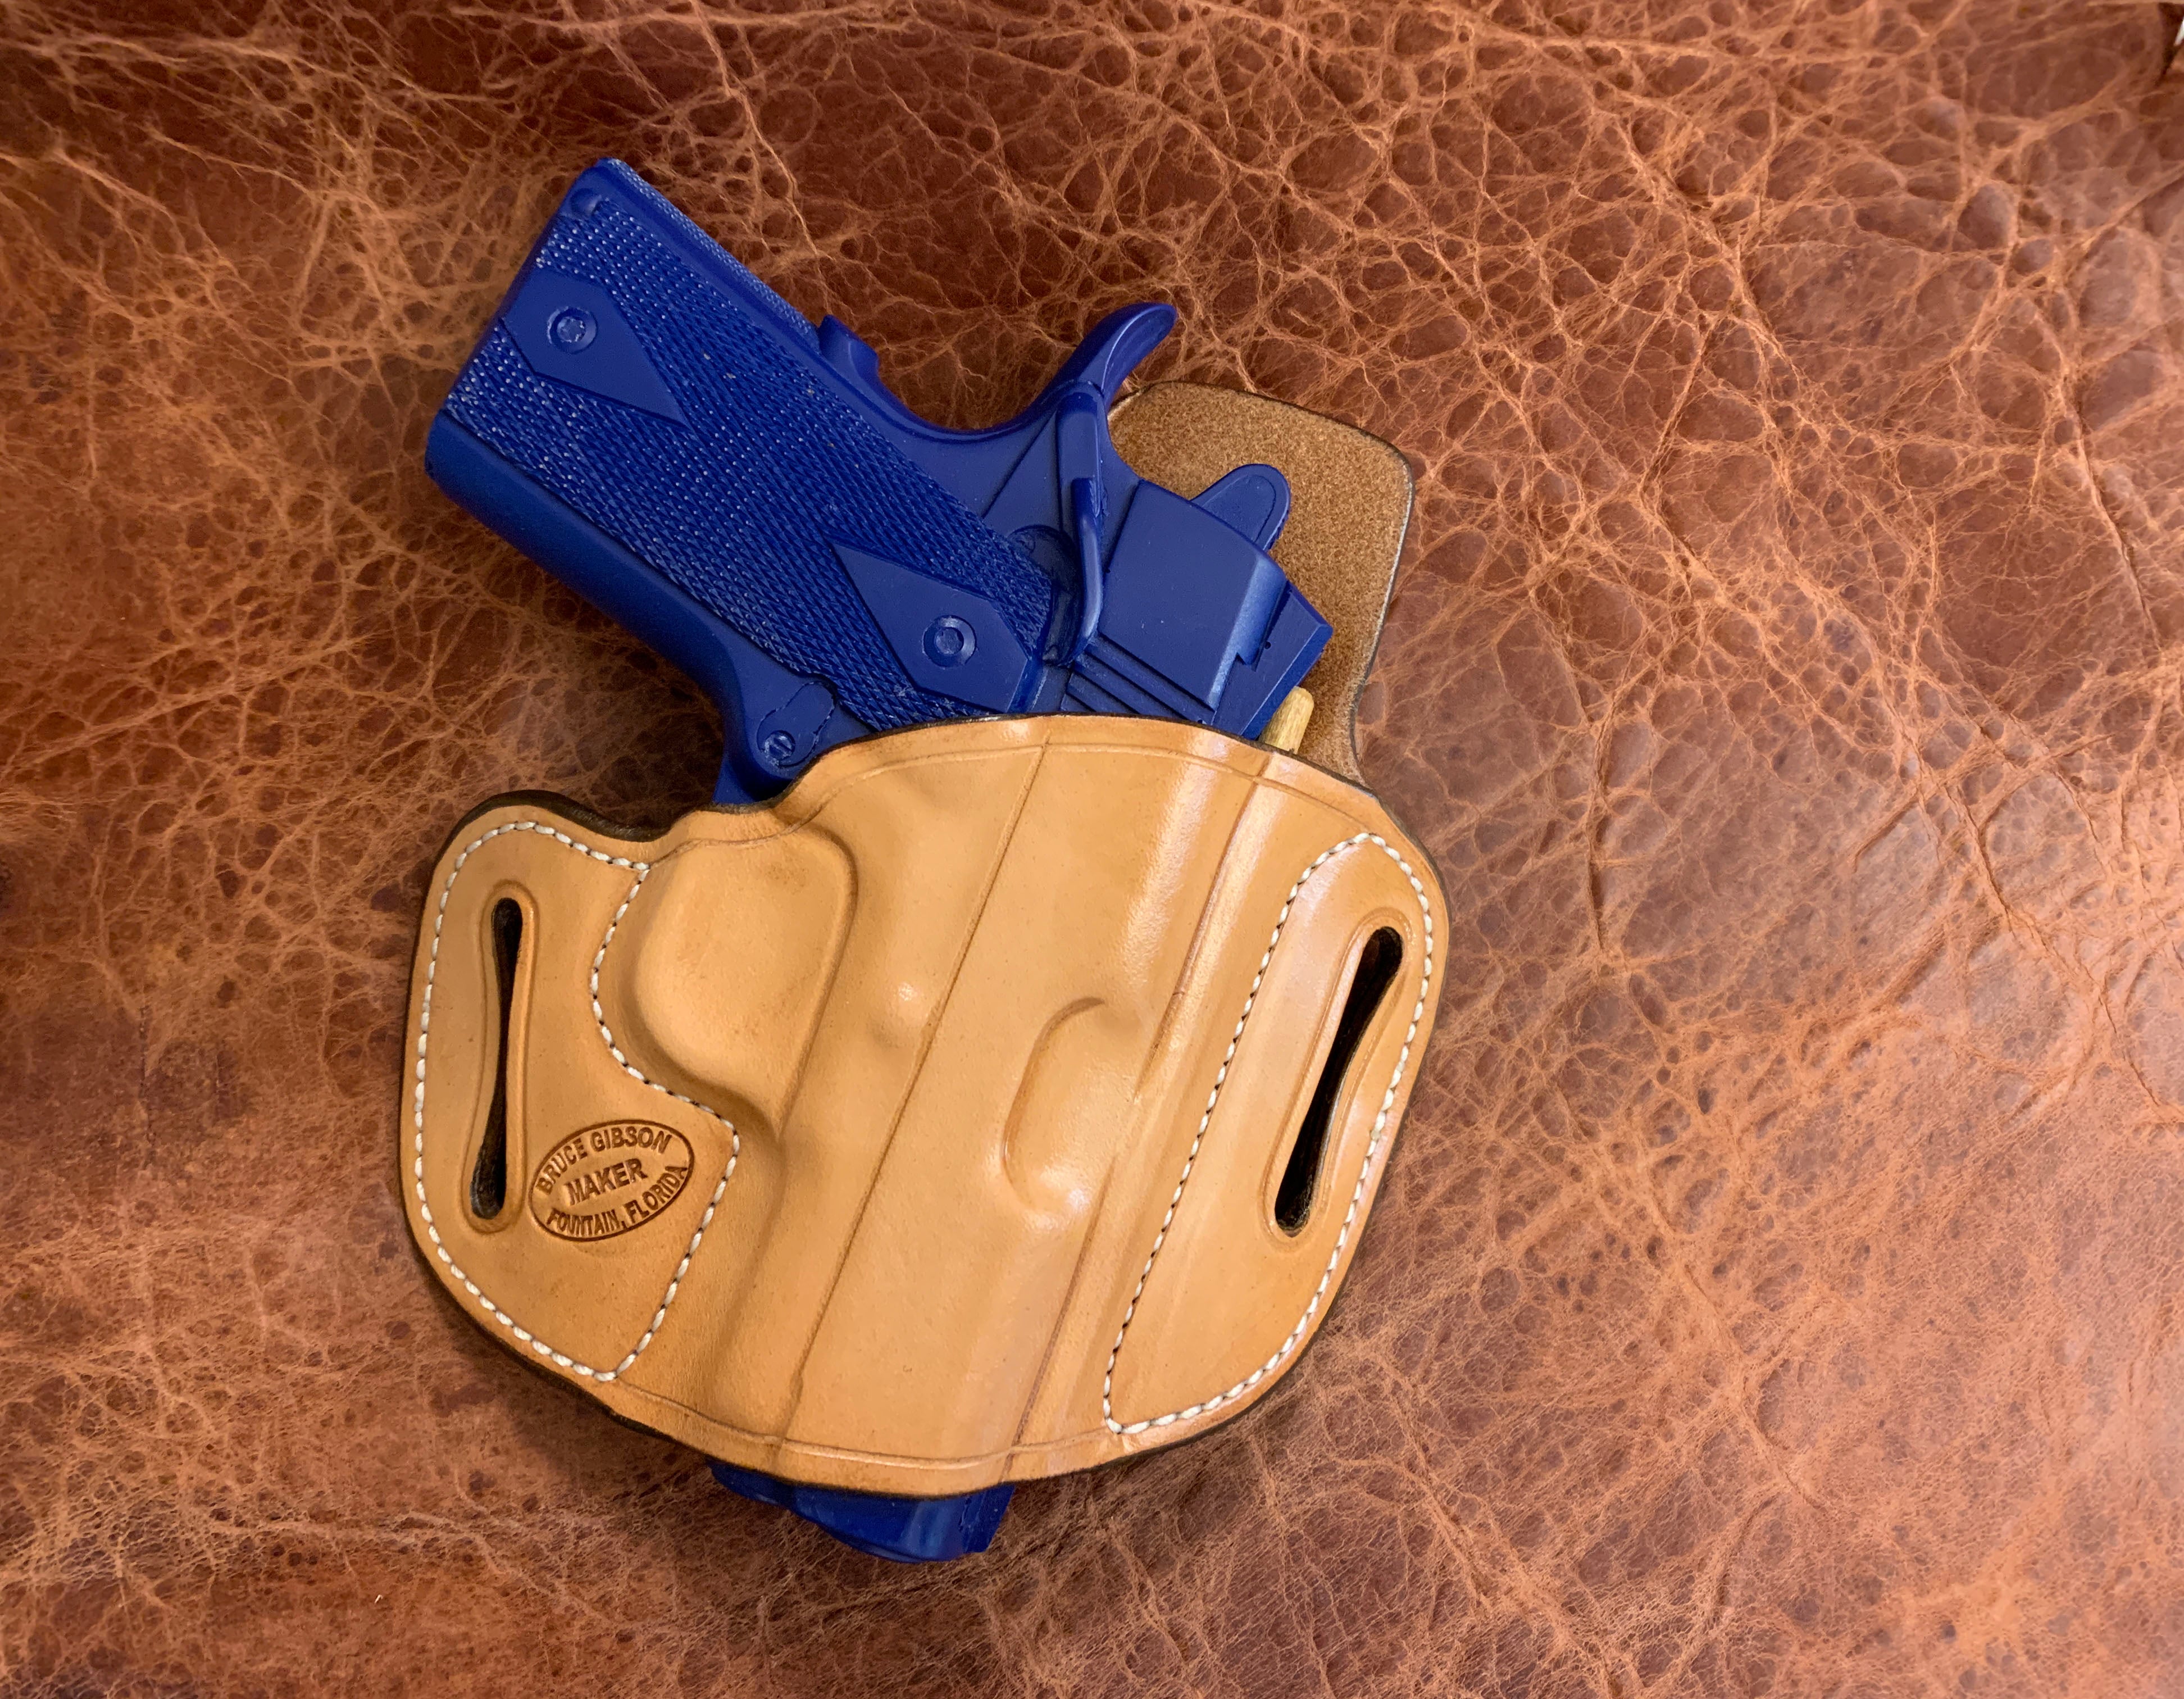 IN-STOCK GIBSON 1911 3" OWB LEATHER PANCAKE HOLSTER NATURAL WITH SWEAT SHIELD 20-DEGREE RAKE